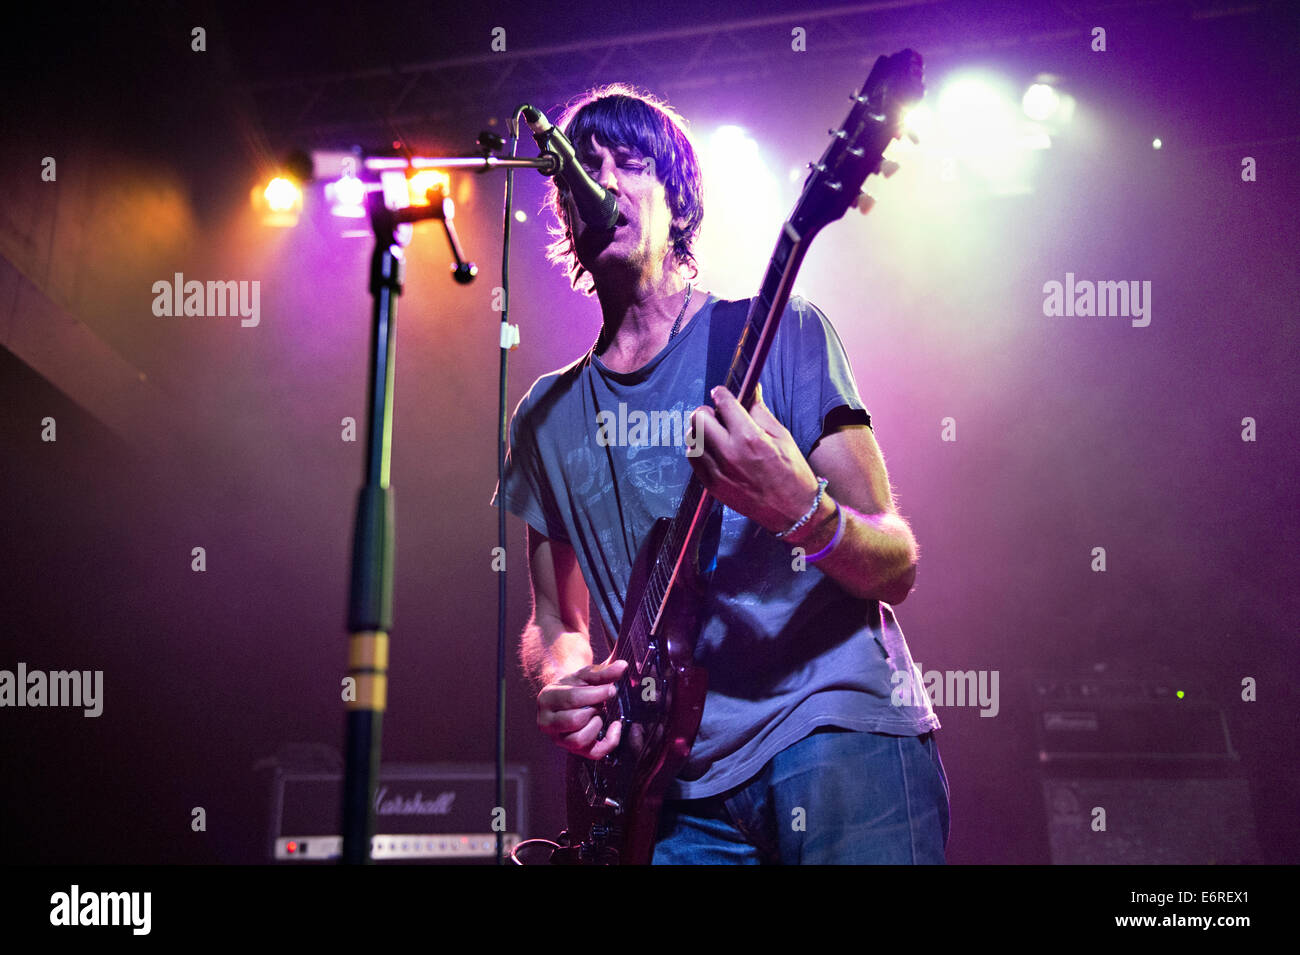 Nottingham, UK. 28th Aug, 2014. US indie rock band Stephen Malkmus & The Jicks, in concert at Nottingham Rescue Rooms, Nottingham, UK. Band leader Stephen Malkmus at the microphone. Credit:  John Bentley/Alamy Live News Stock Photo